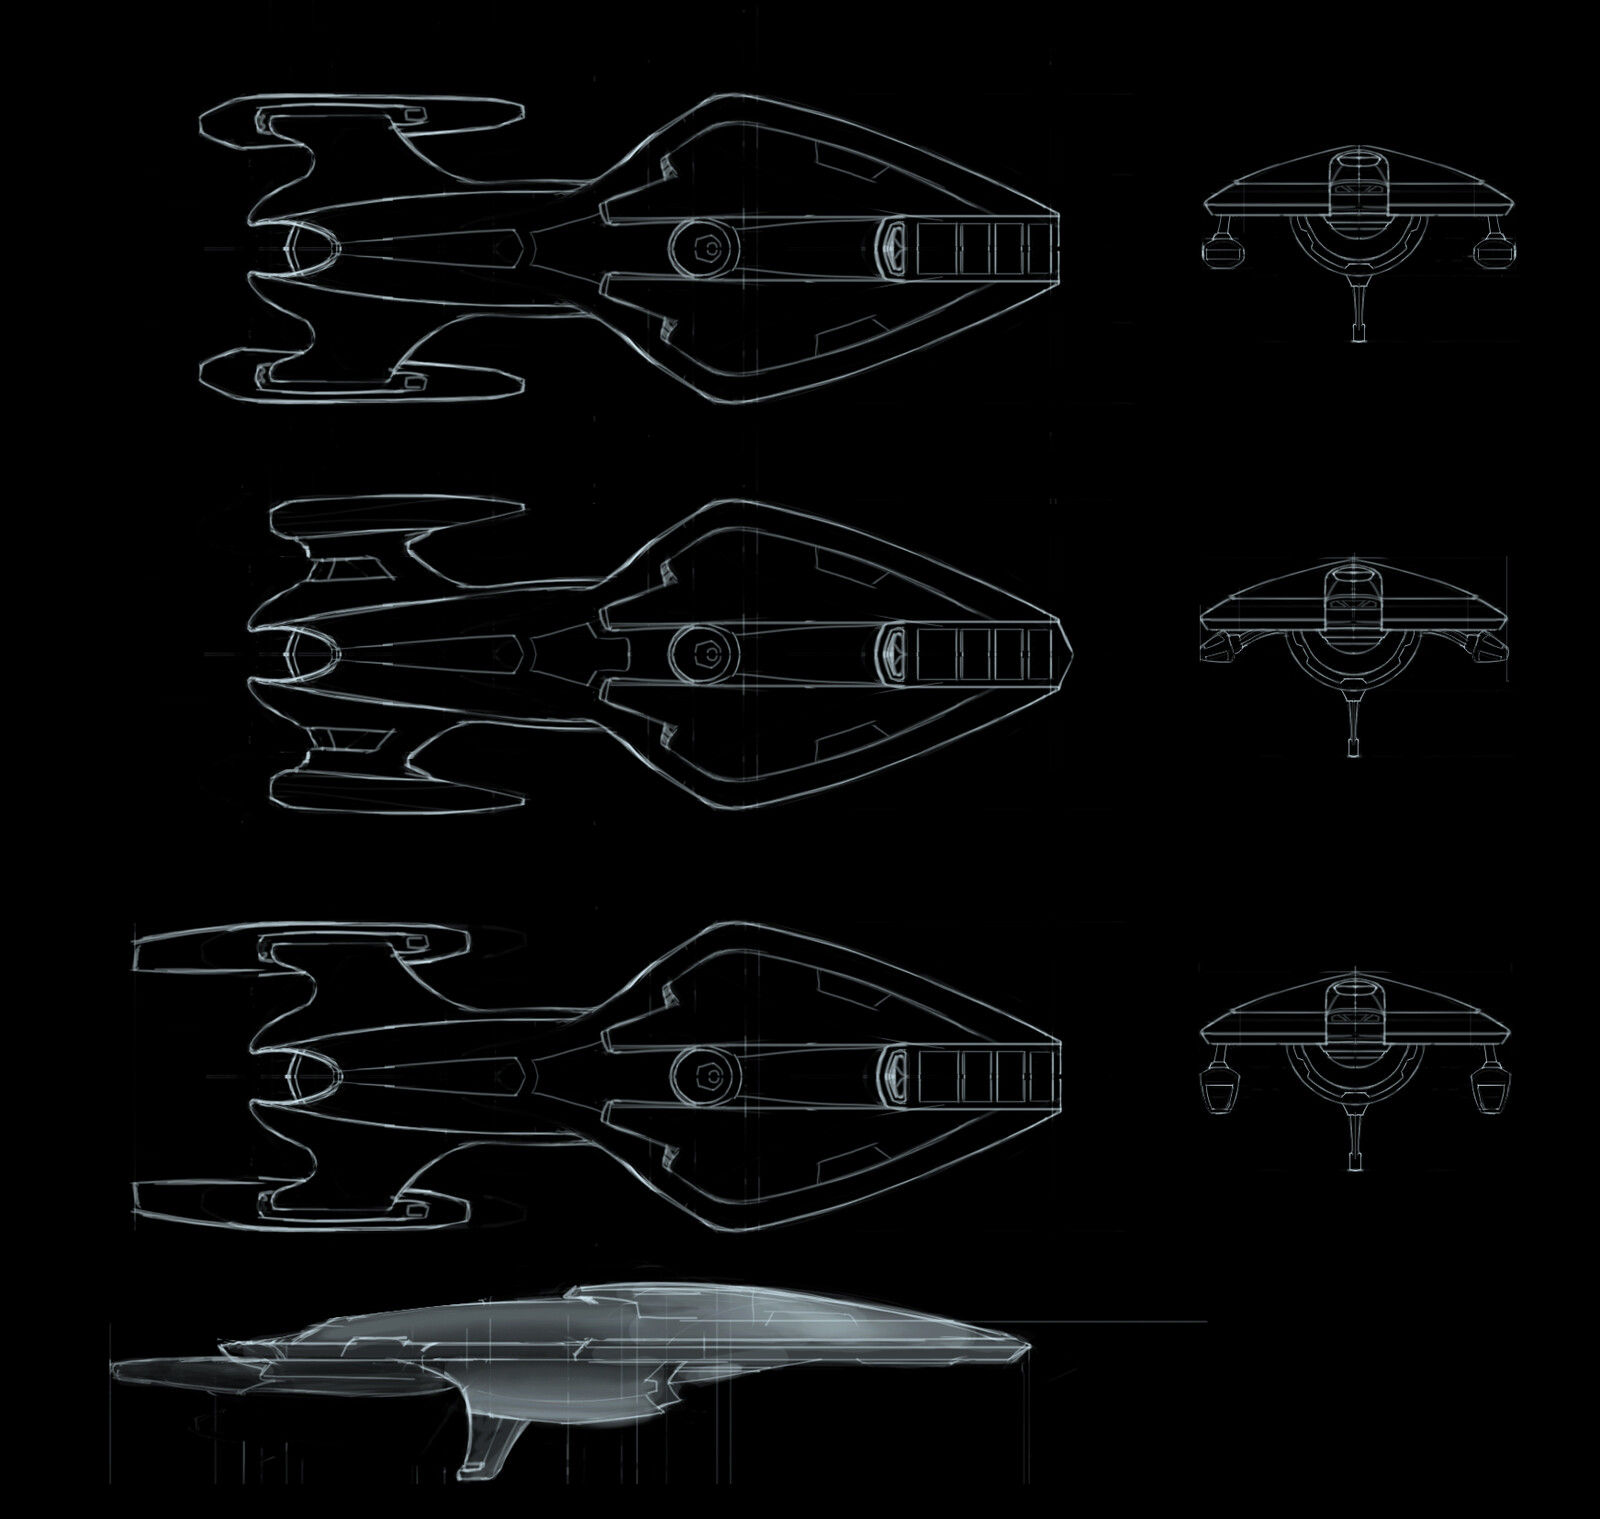 Second set of options for the Pathfinder, focusing on the nacelle pylon design.